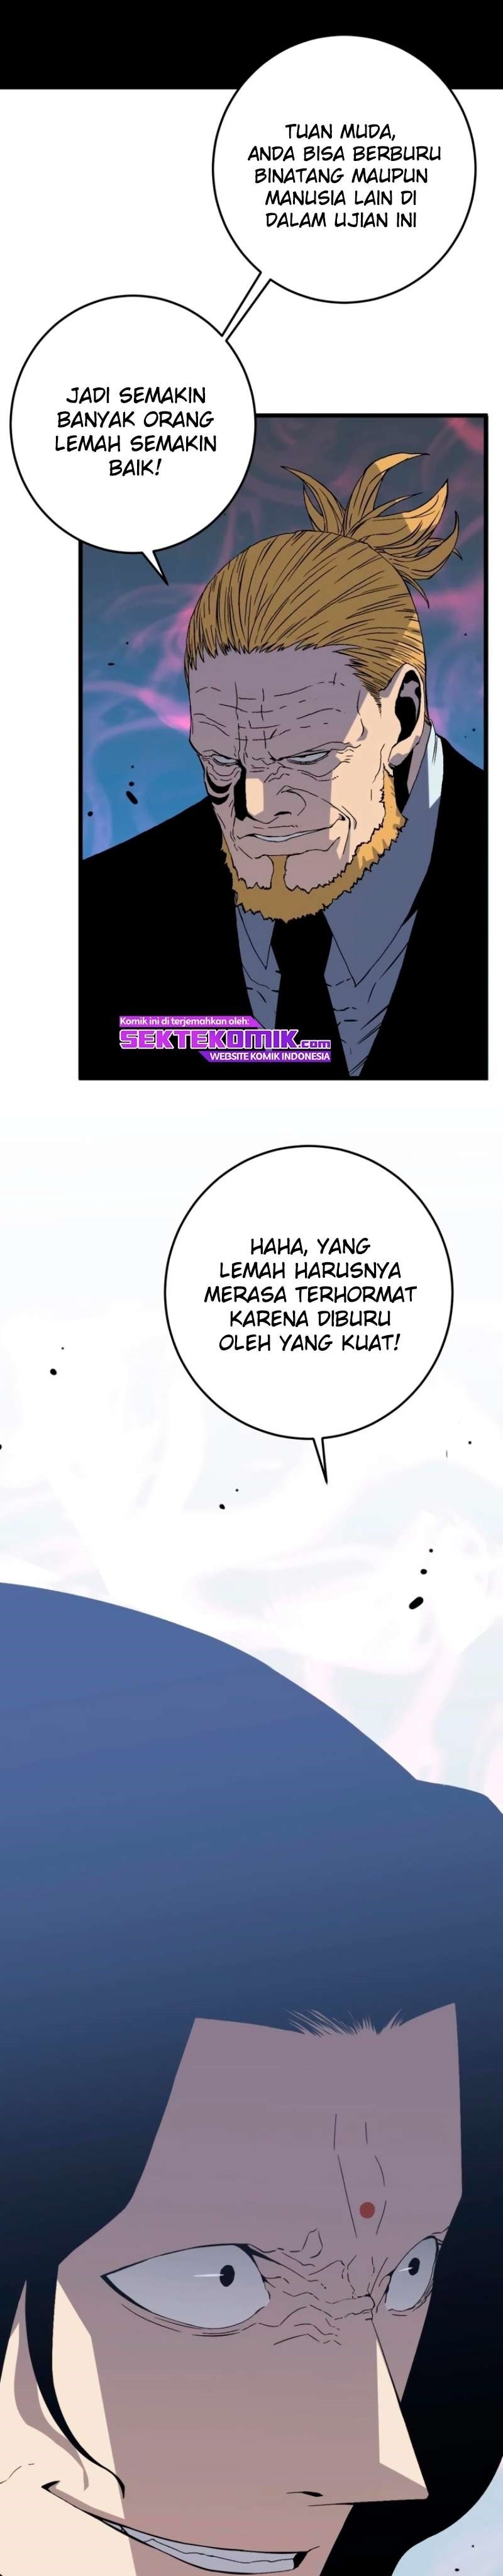 I Copy Talents (Your Talent is Mine) Chapter 06